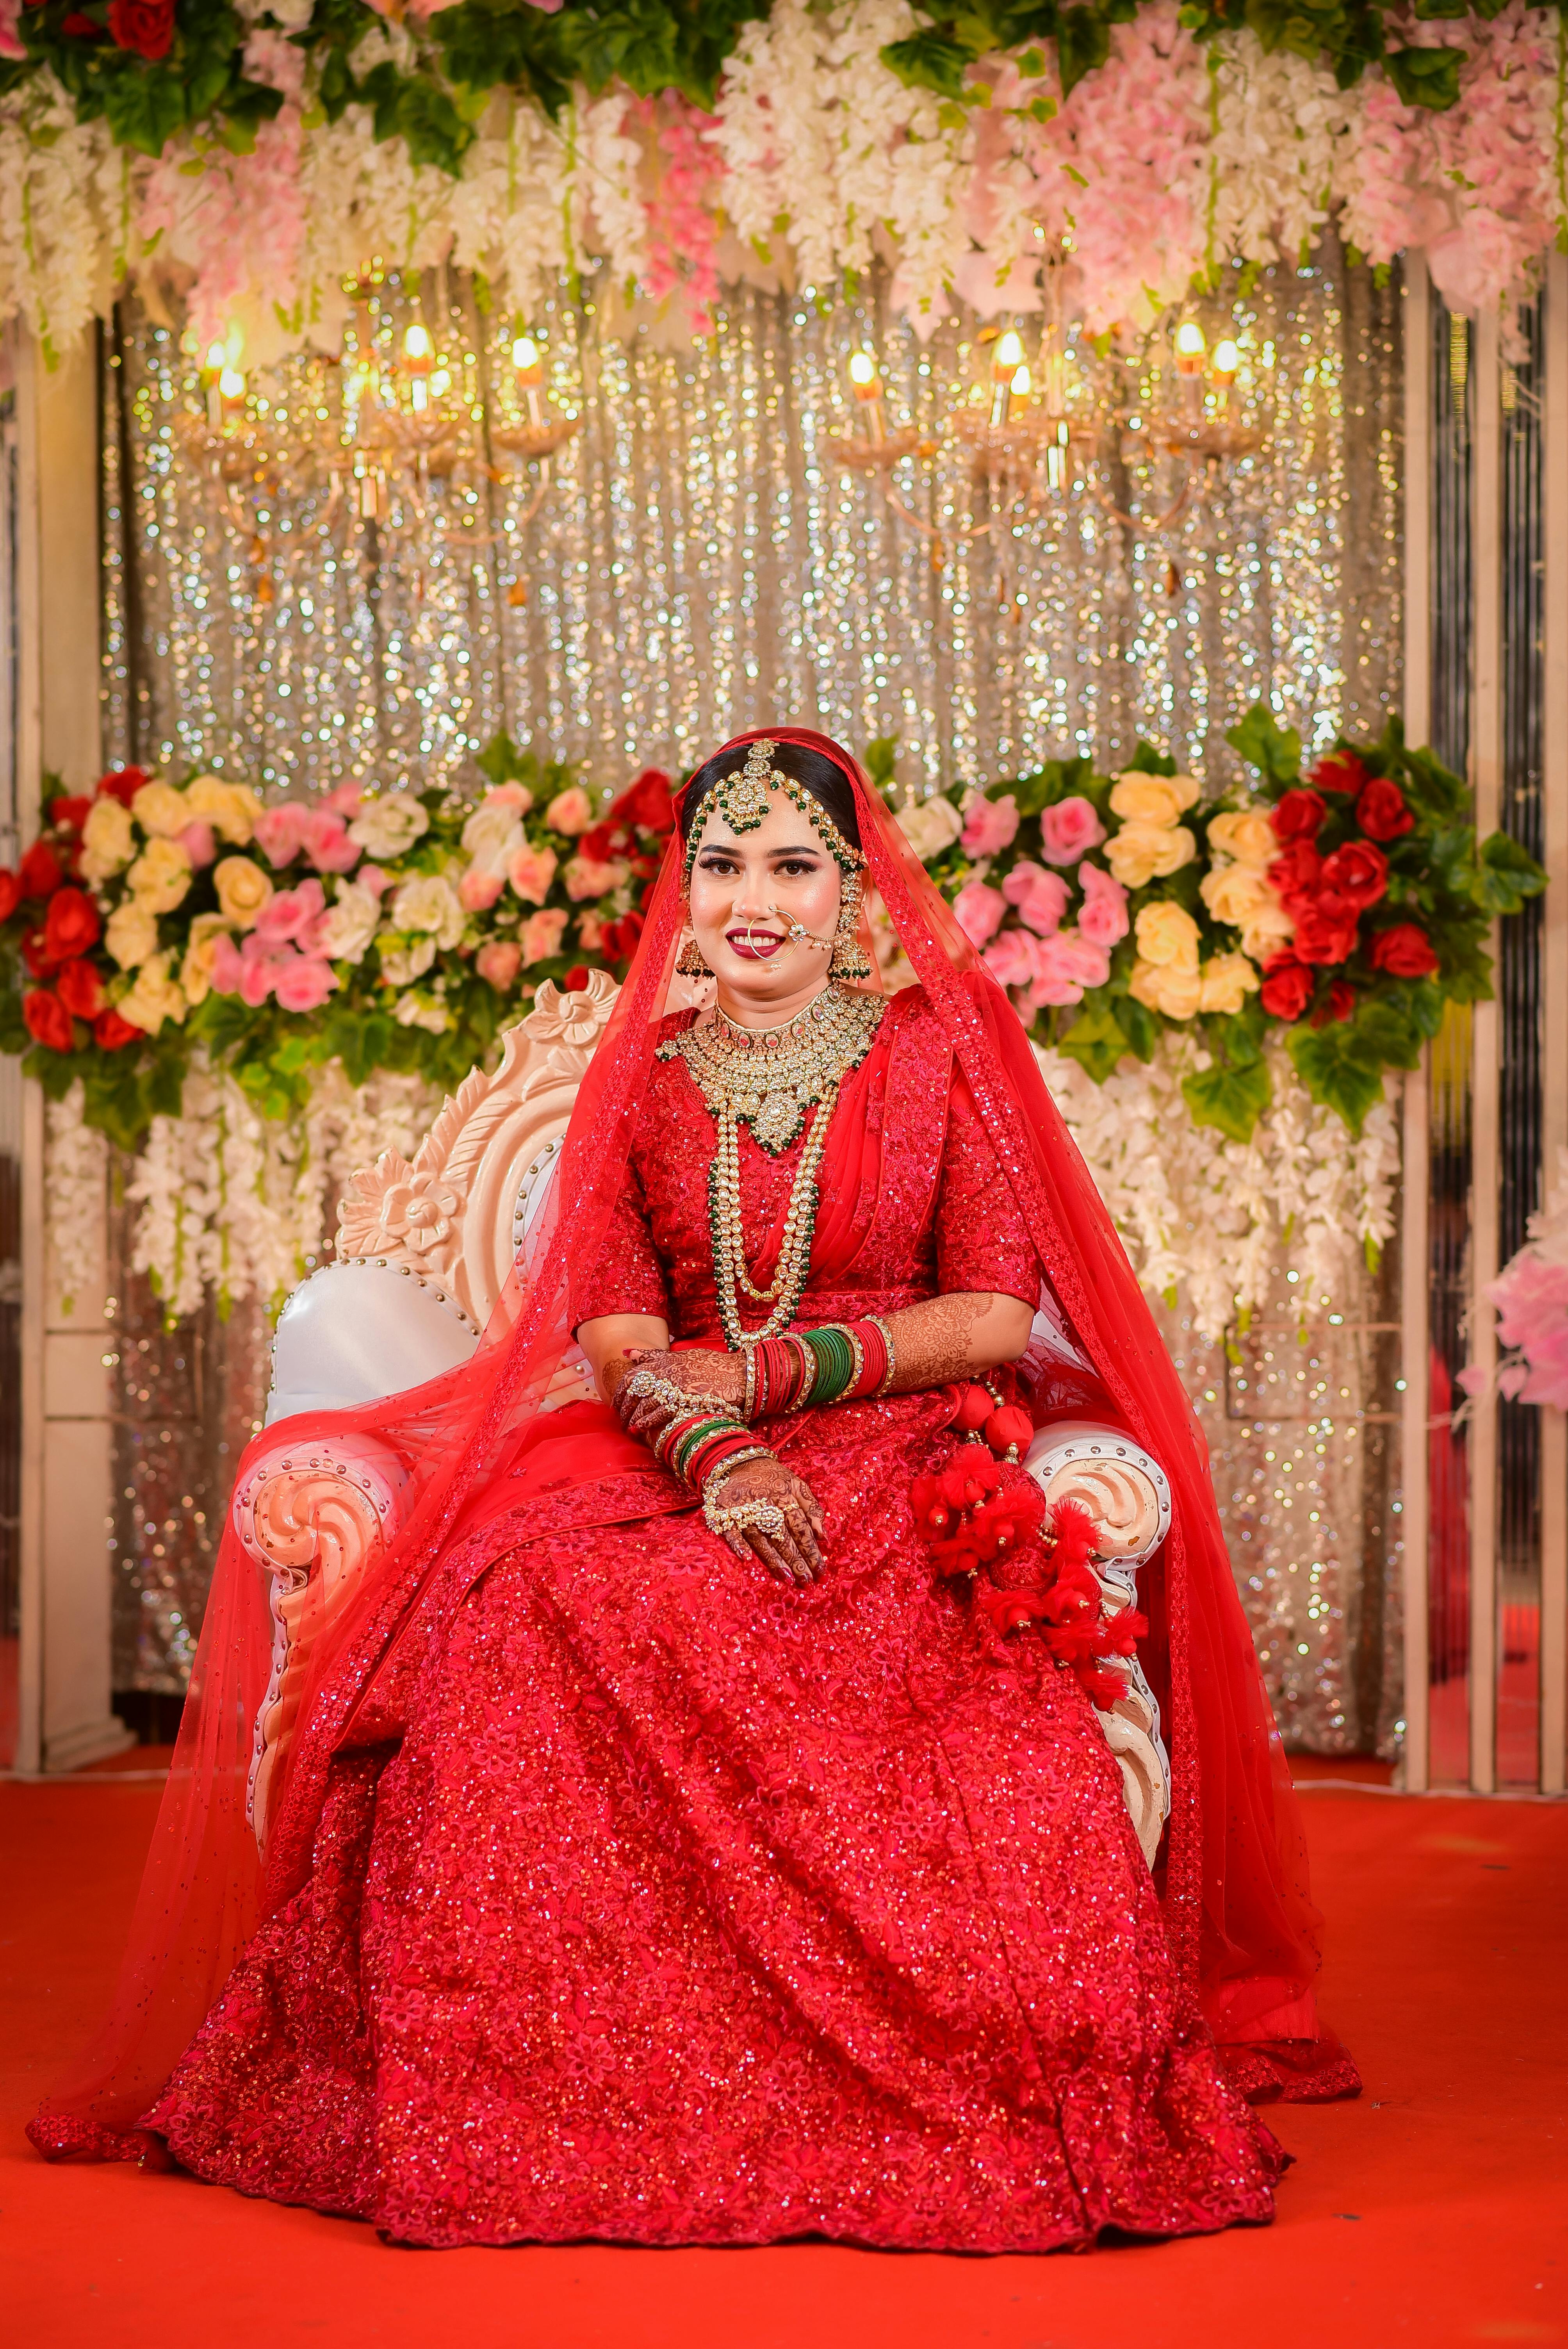 Stylish Indian Wedding Outfits for Guests: Get Ready to Impress